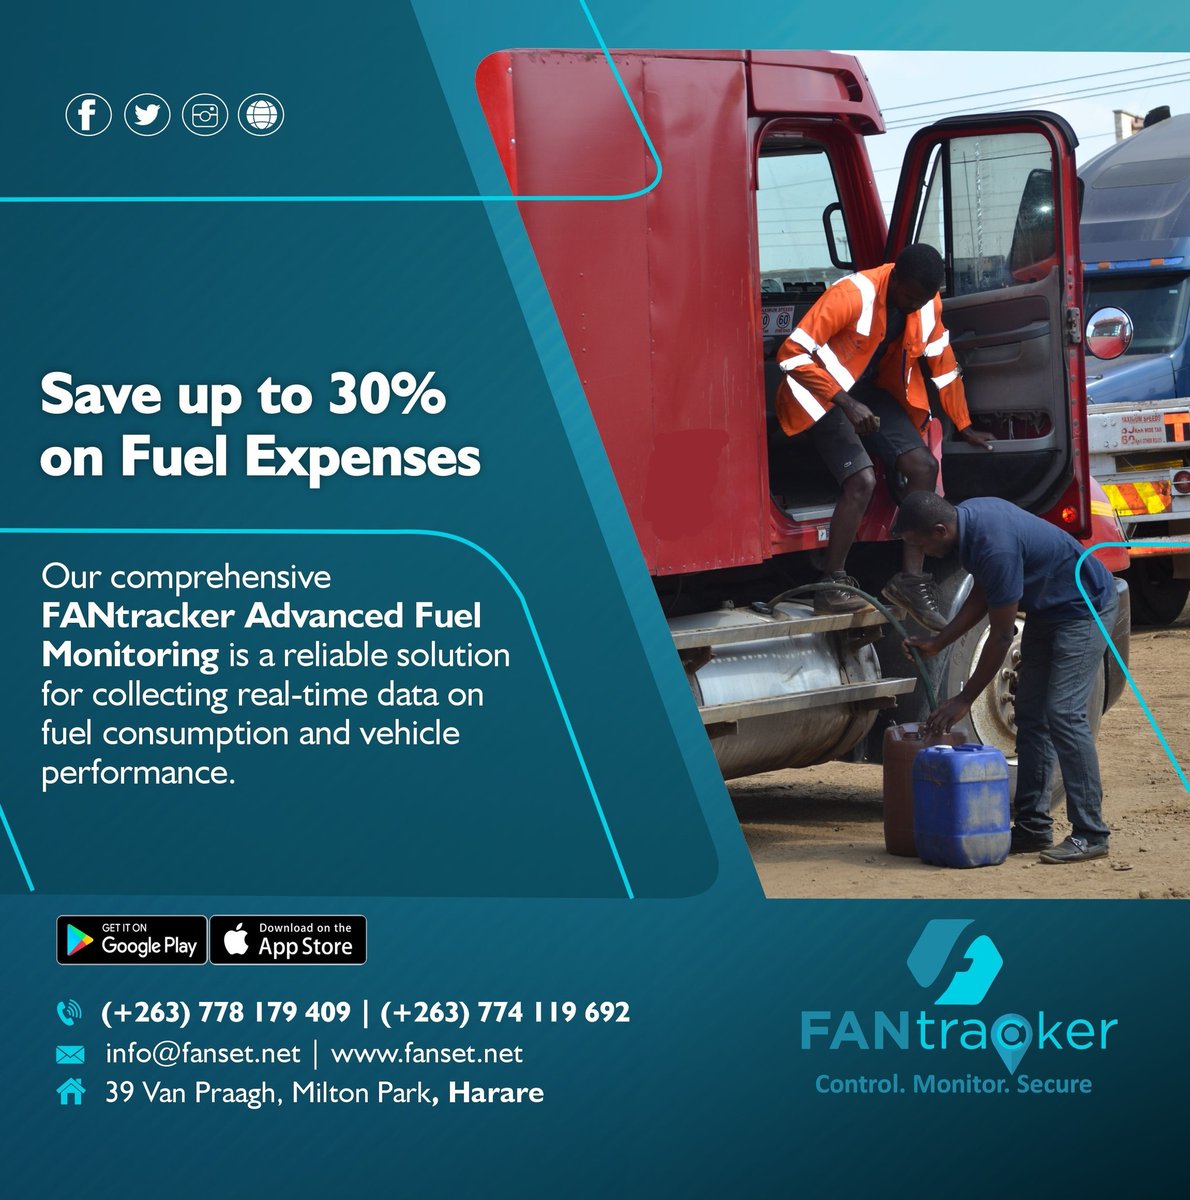 Our comprehensive fuel and vehicle monitoring solution is a reliable solution for collecting real-time data on fuel consumption and vehicle performance. Sign up for FANtracker Advanced Fuel Monitoring Solution today Contact: +263778179409/ 0774119692 #FANtracker #Fuelmonitoring